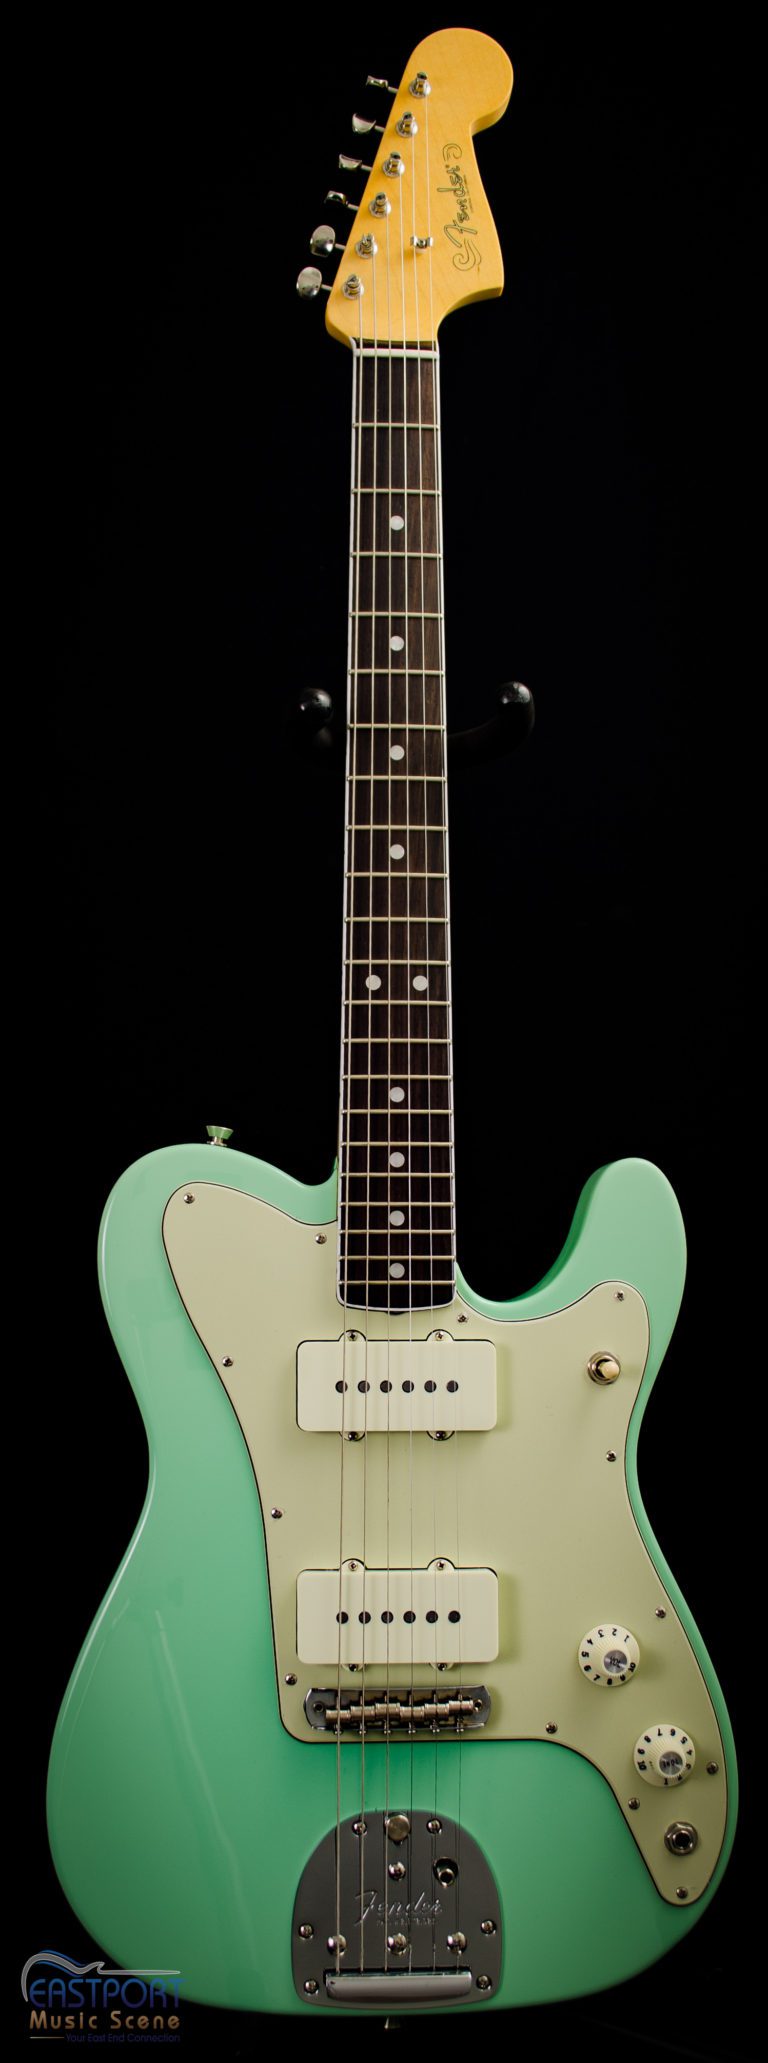 A green electric guitar with the strings missing.